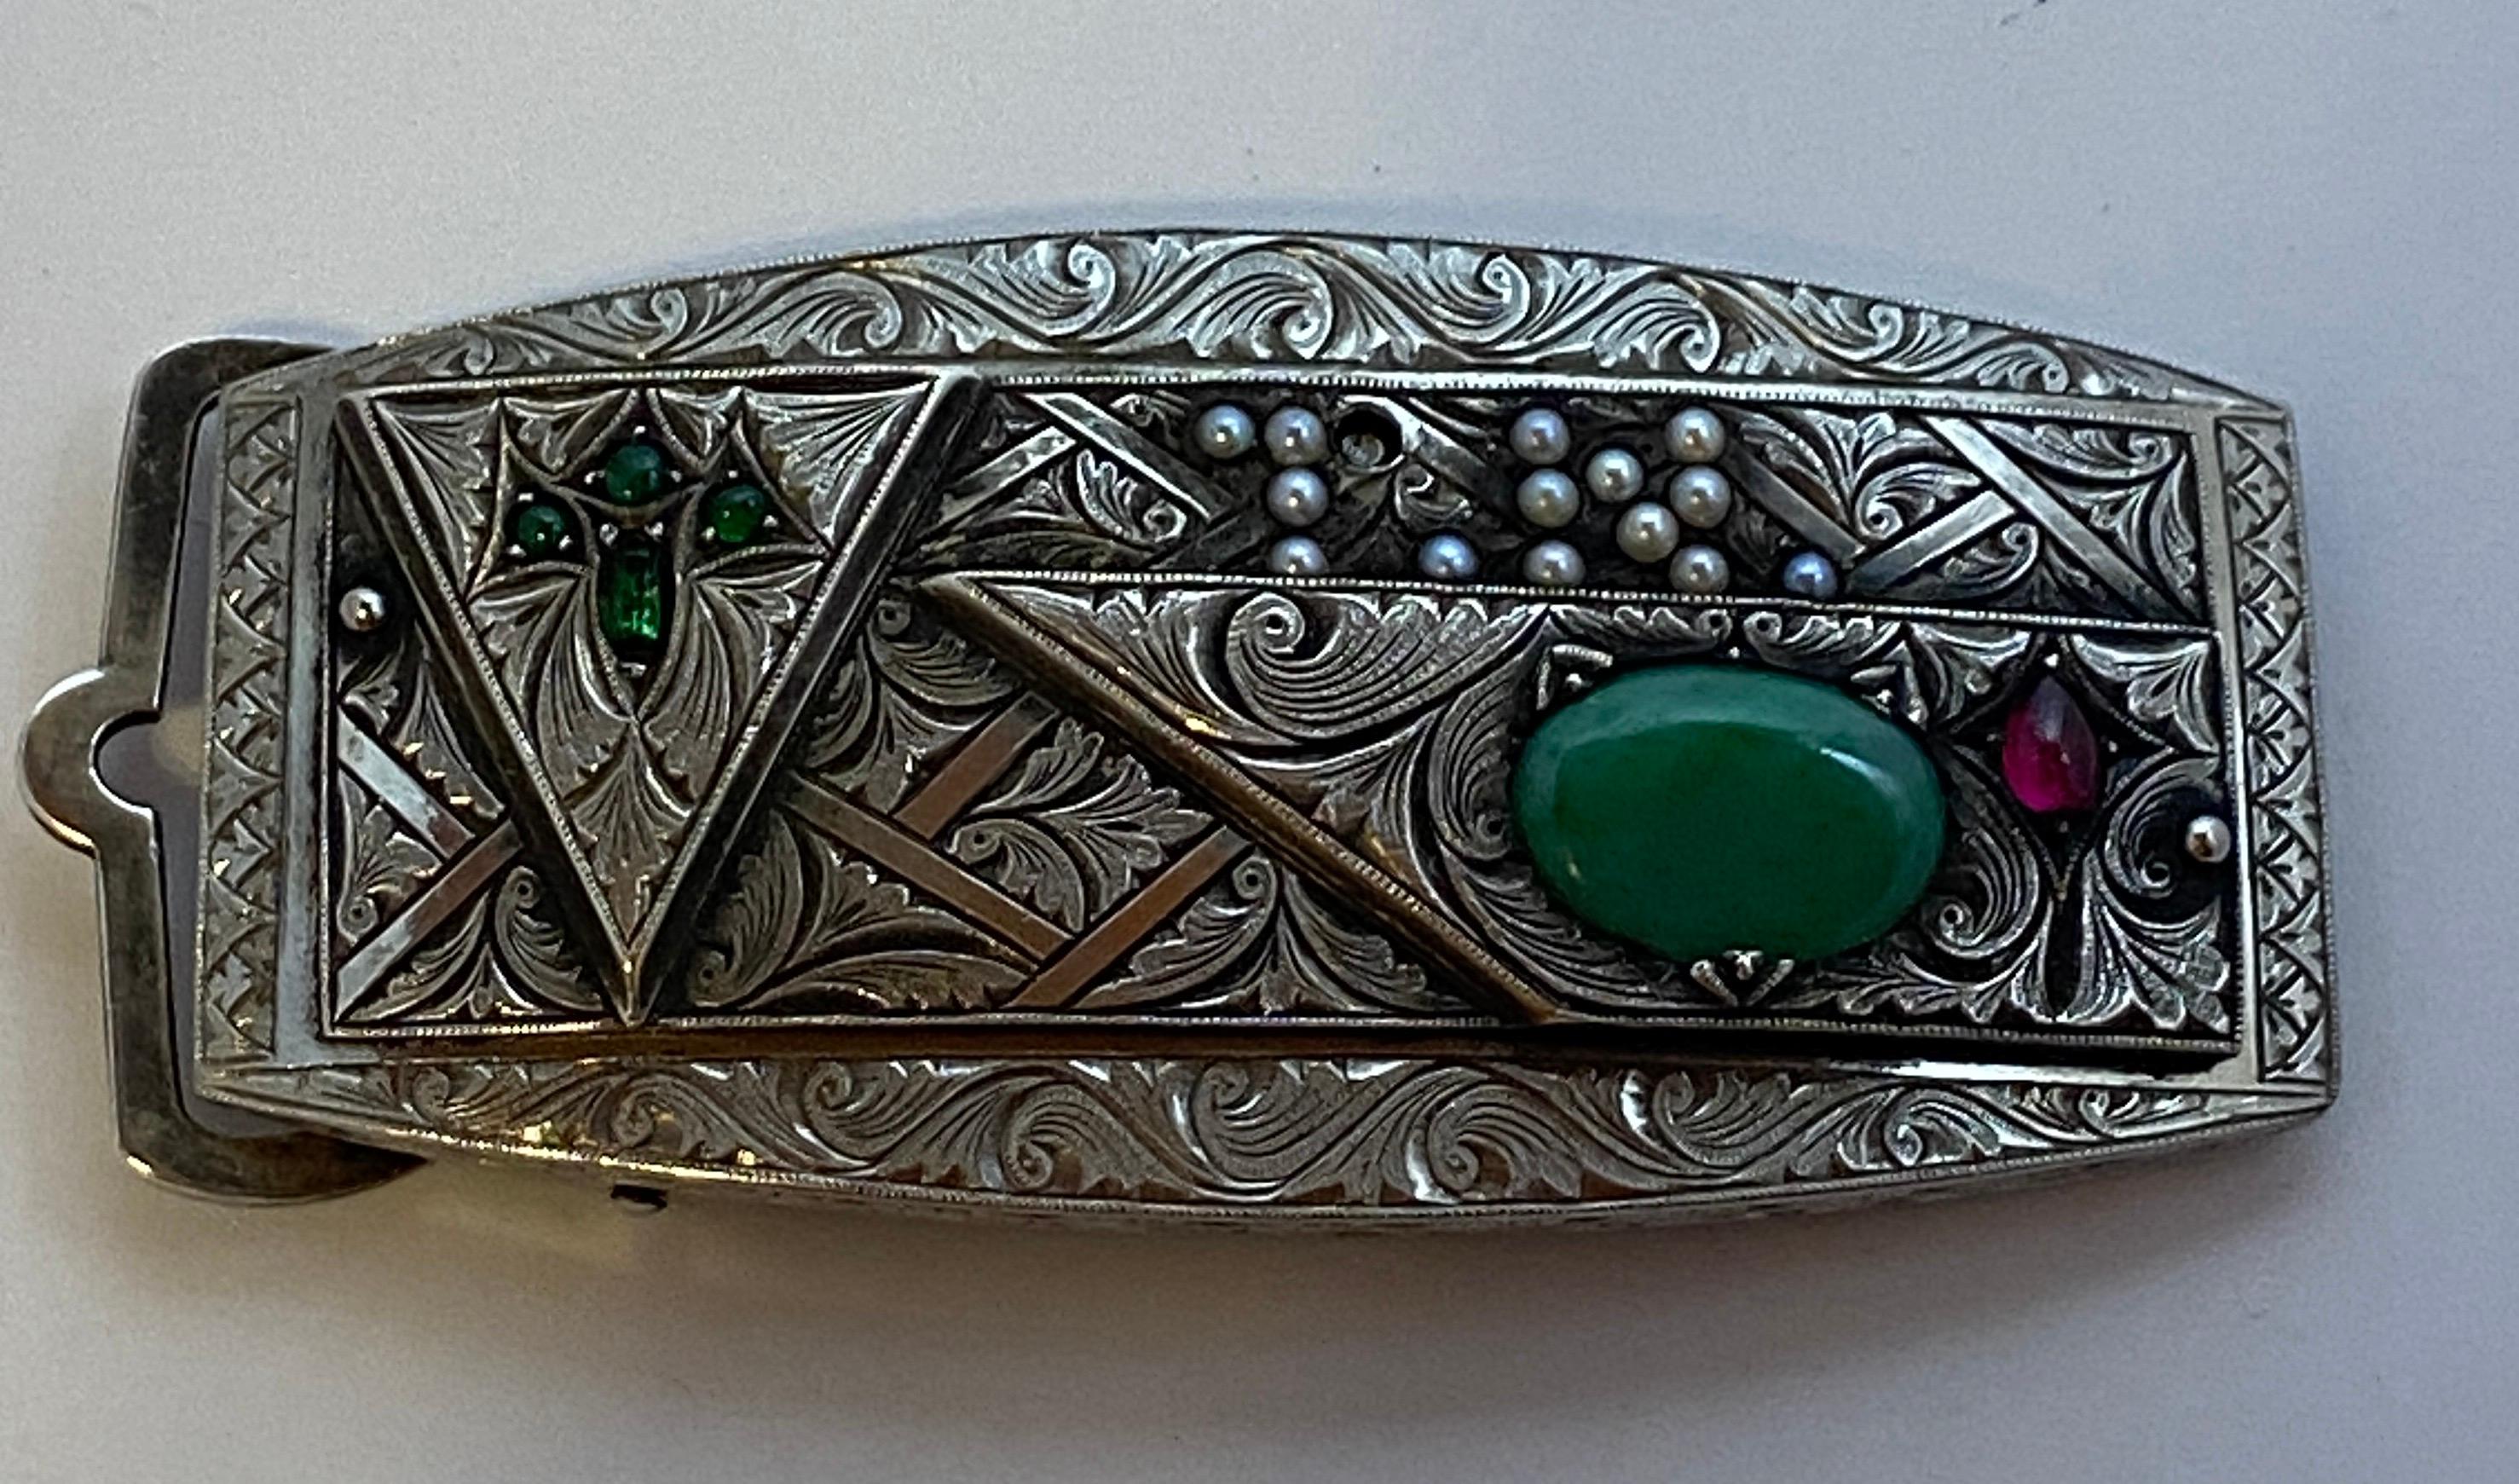 Custom, One-of-a-kind, Magnificently detailed Victorian Silver Belt buckle finely etched with swirls of leaves and gently waves, accented with an oval jade, four emeralds, ruby and 14 micro pearls (one micro pearl is missing). All stones and pearls